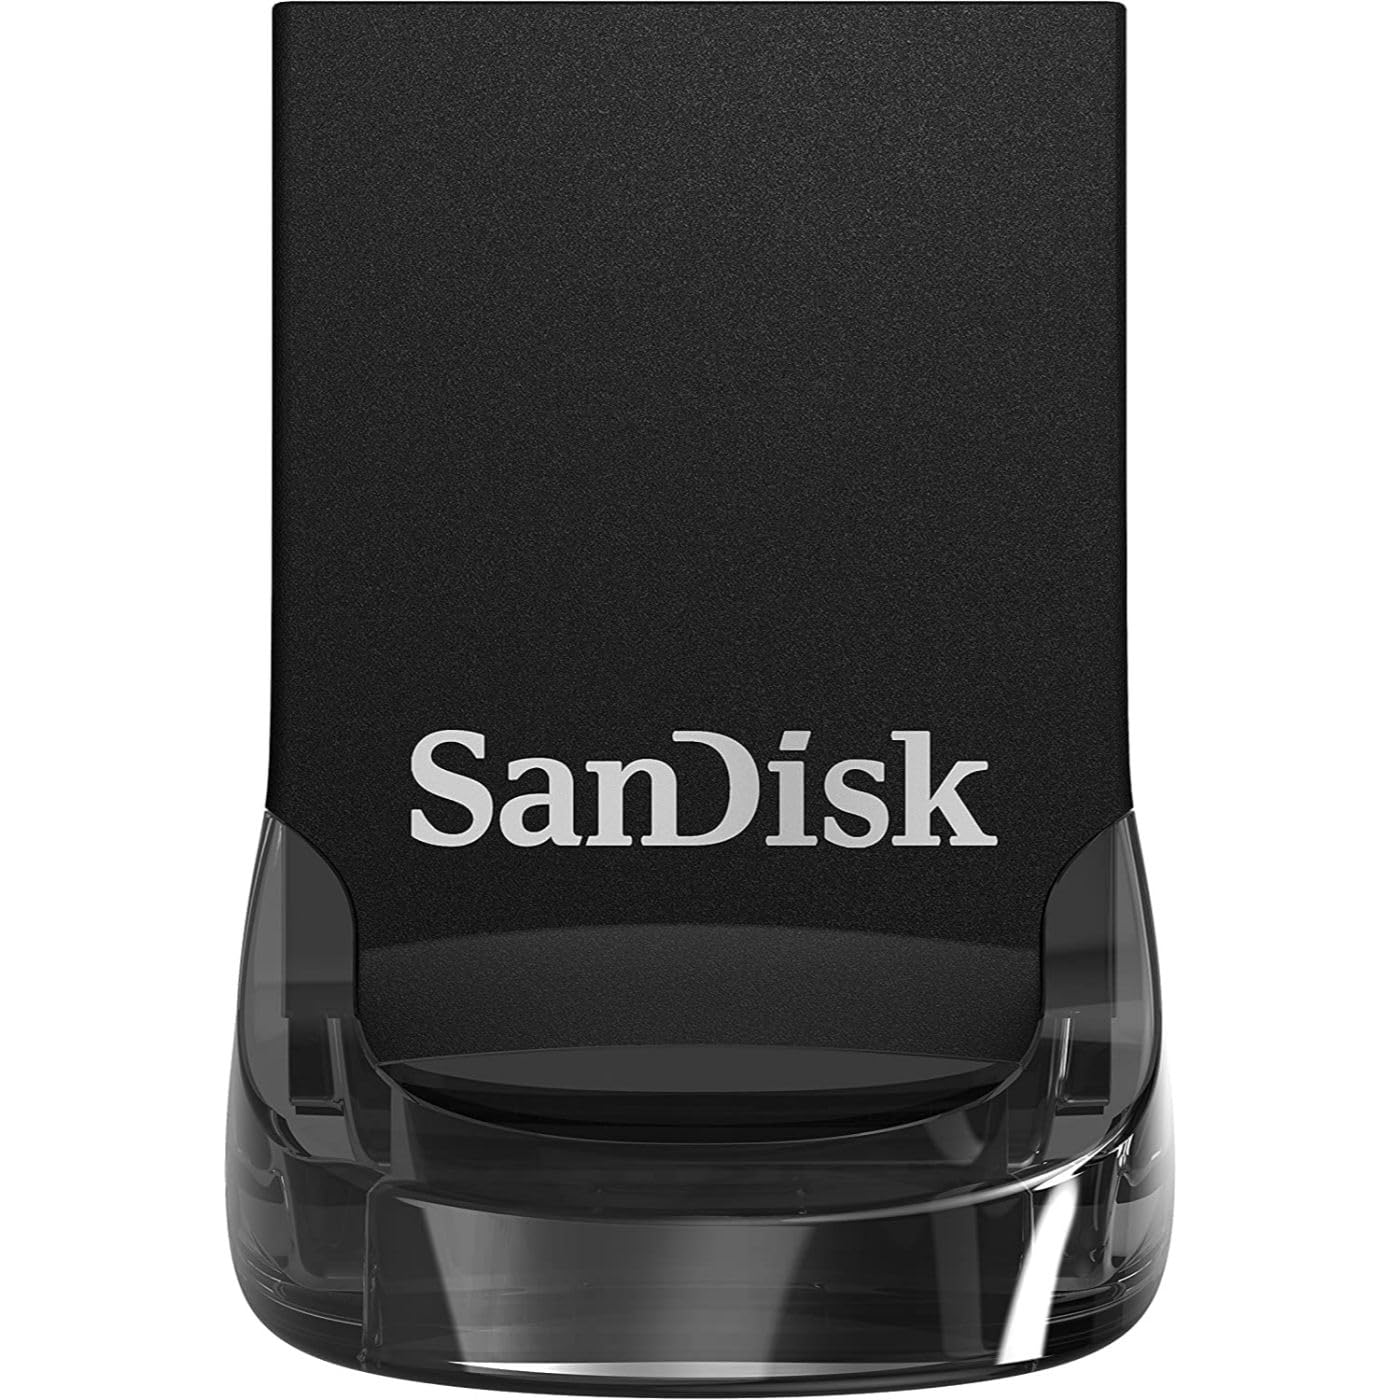 SanDisk 128GB Ultra Fit USB 3.2 Gen 1 Flash Drive - Up to 400MB/s, Plug-and-Stay Design - SDCZ430-128G-GAM46